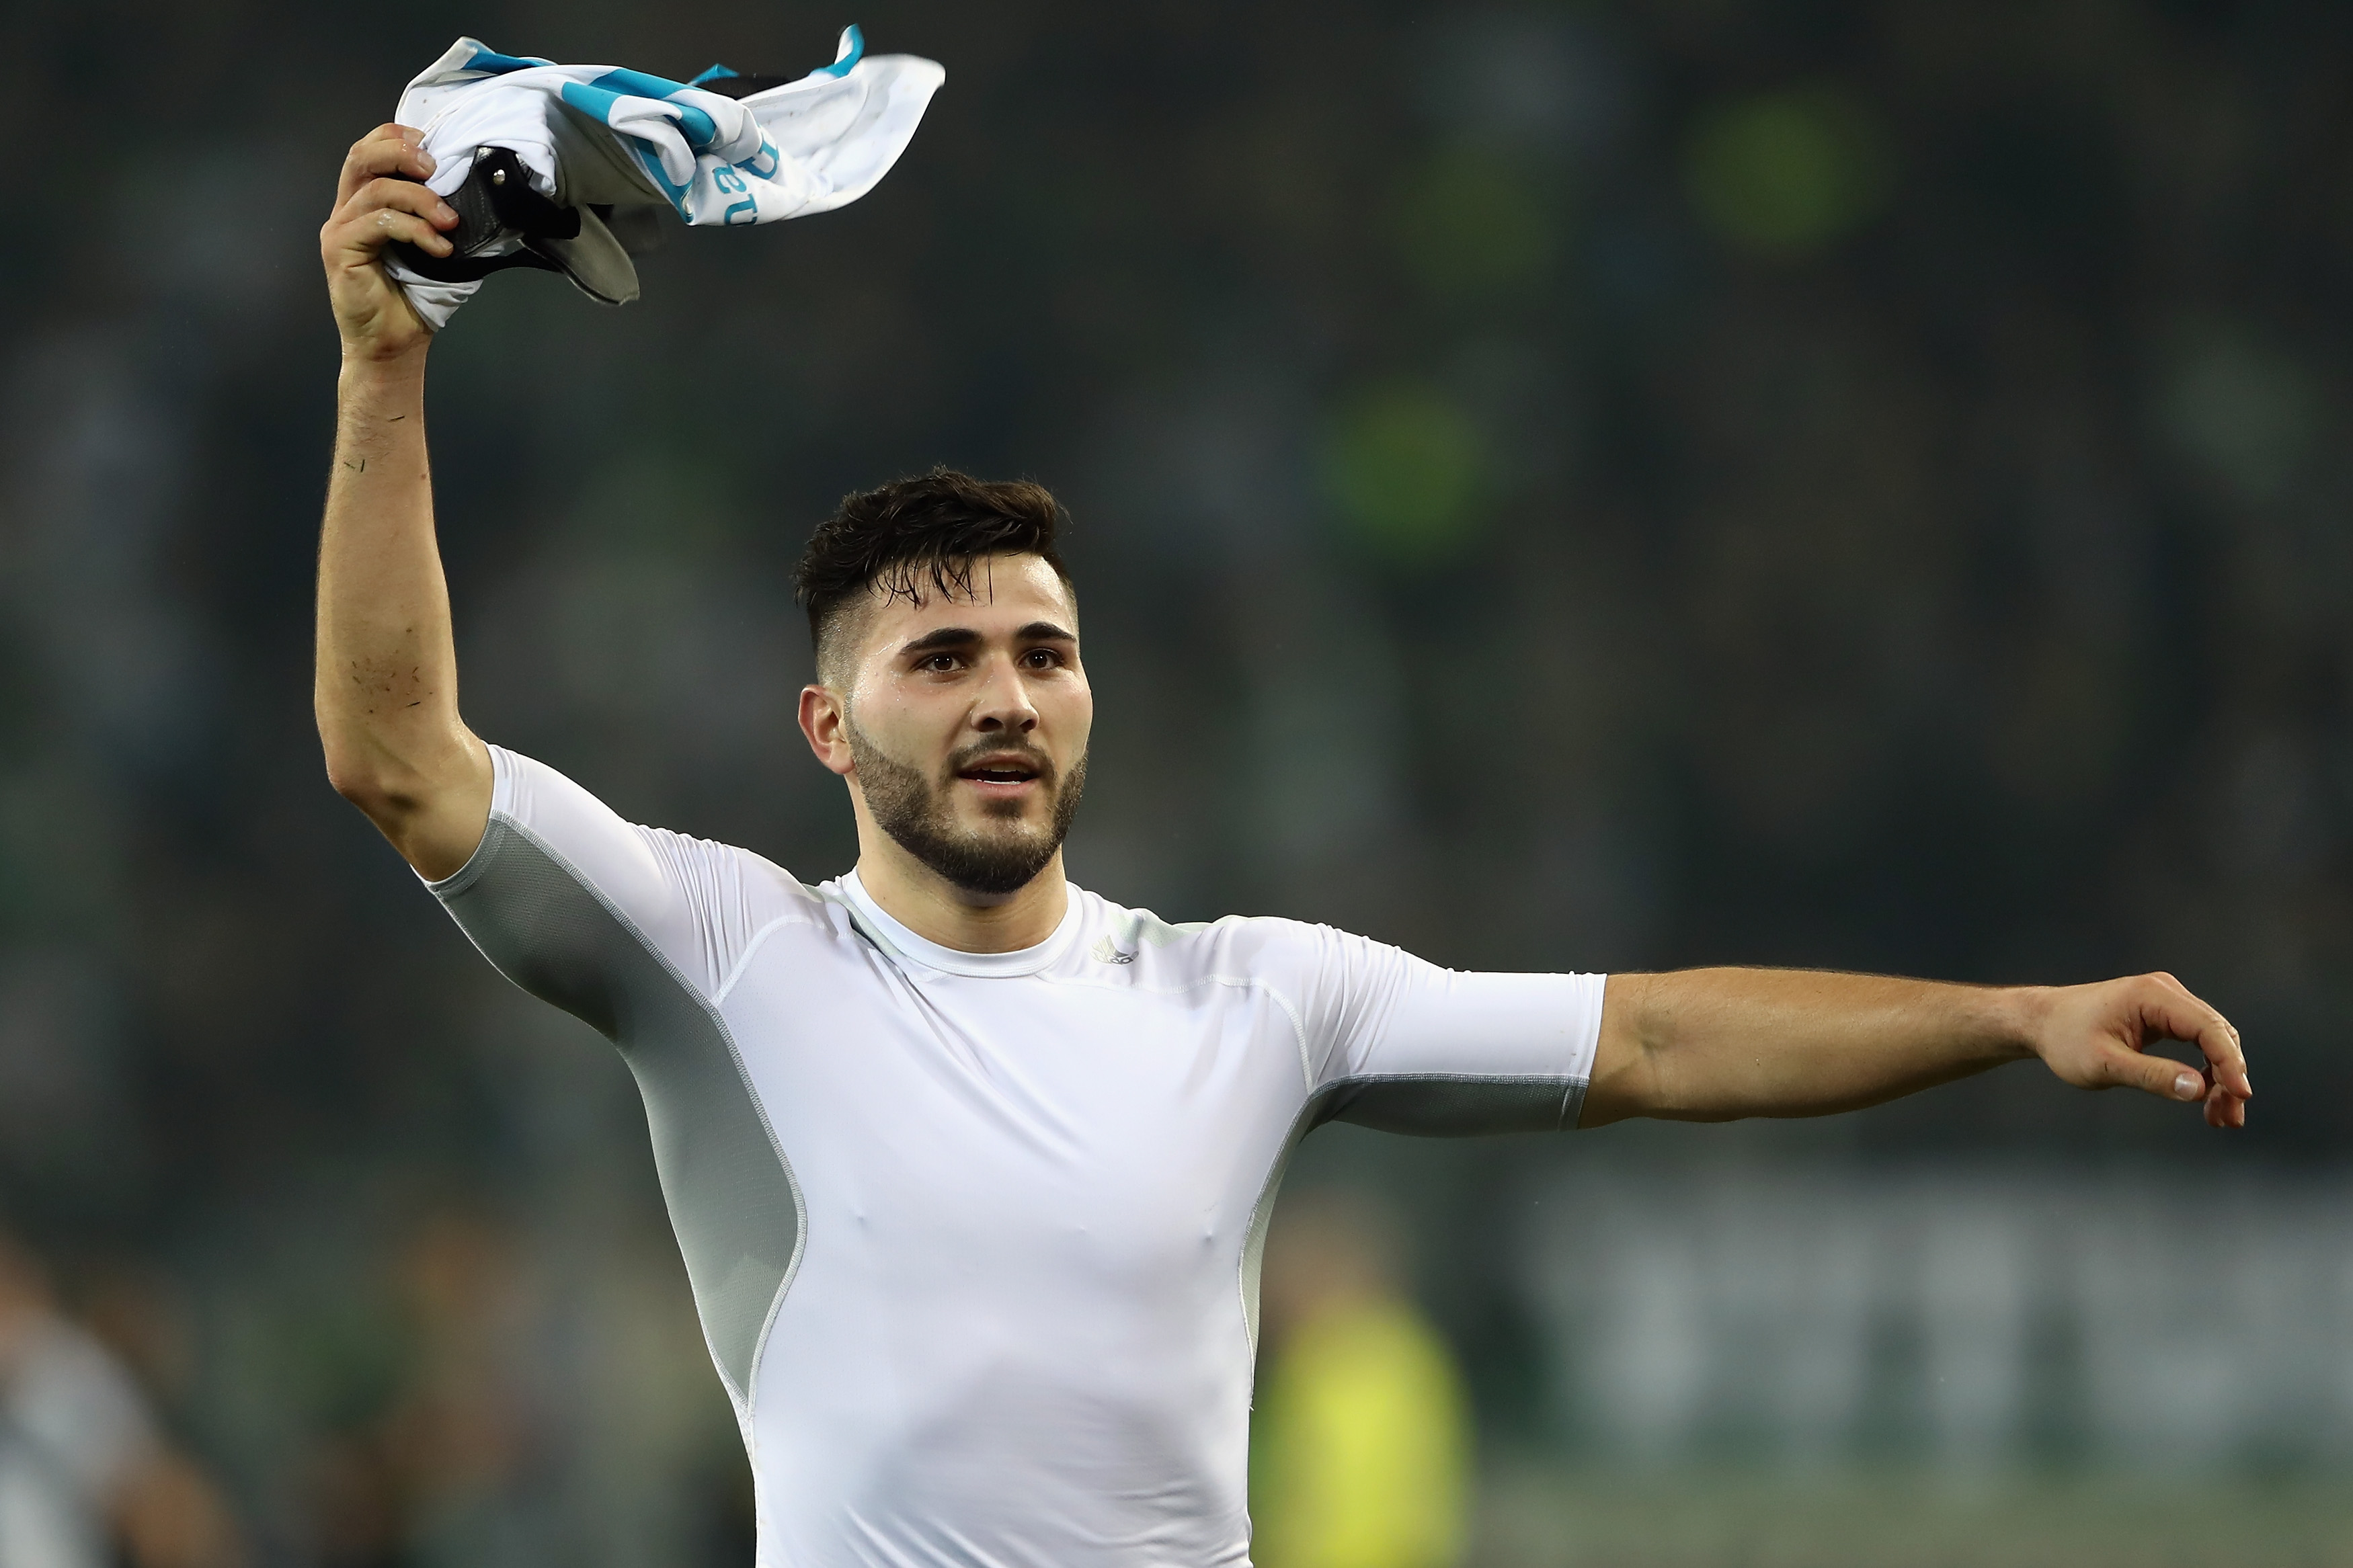 MOENCHENGLADBACH, GERMANY - MARCH 16: Sead Kolasinac of Schalke celebrates with the fans after the UEFA Europa  League Round of 16 second leg match between Borussia Moenchengladbach and FC Schalke 04 at Borussia Park Stadium on March 16, 2017 in Moenchengladbach, Germany.  (Photo by Alex Grimm/Bongarts/Getty Images )